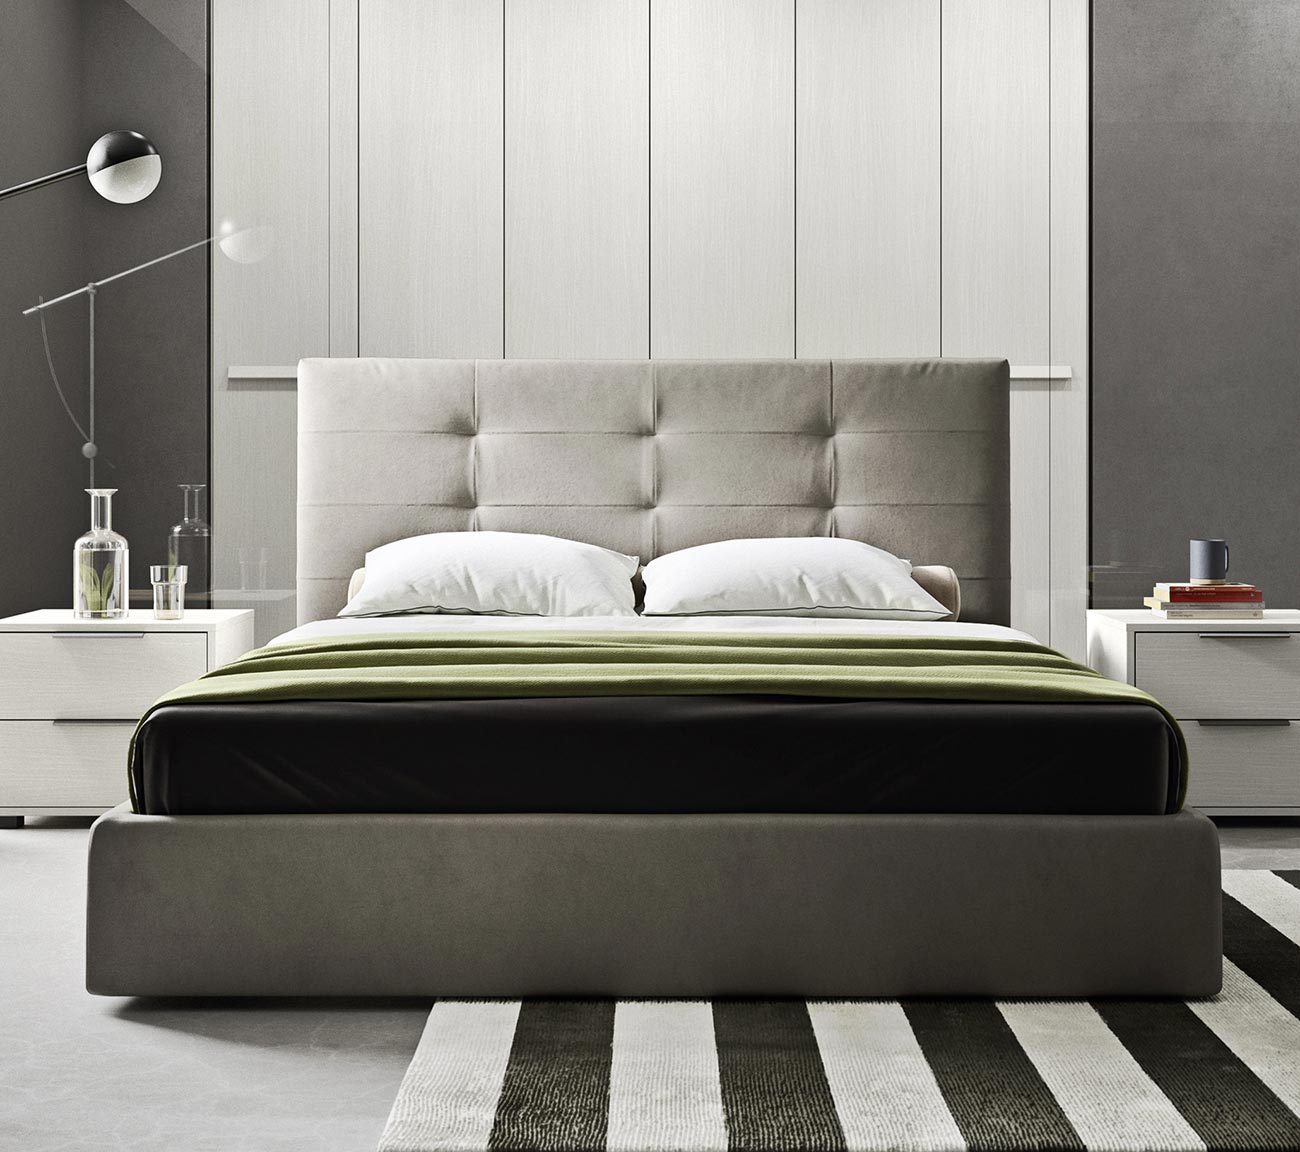 Standard and container contemporary-style double bed